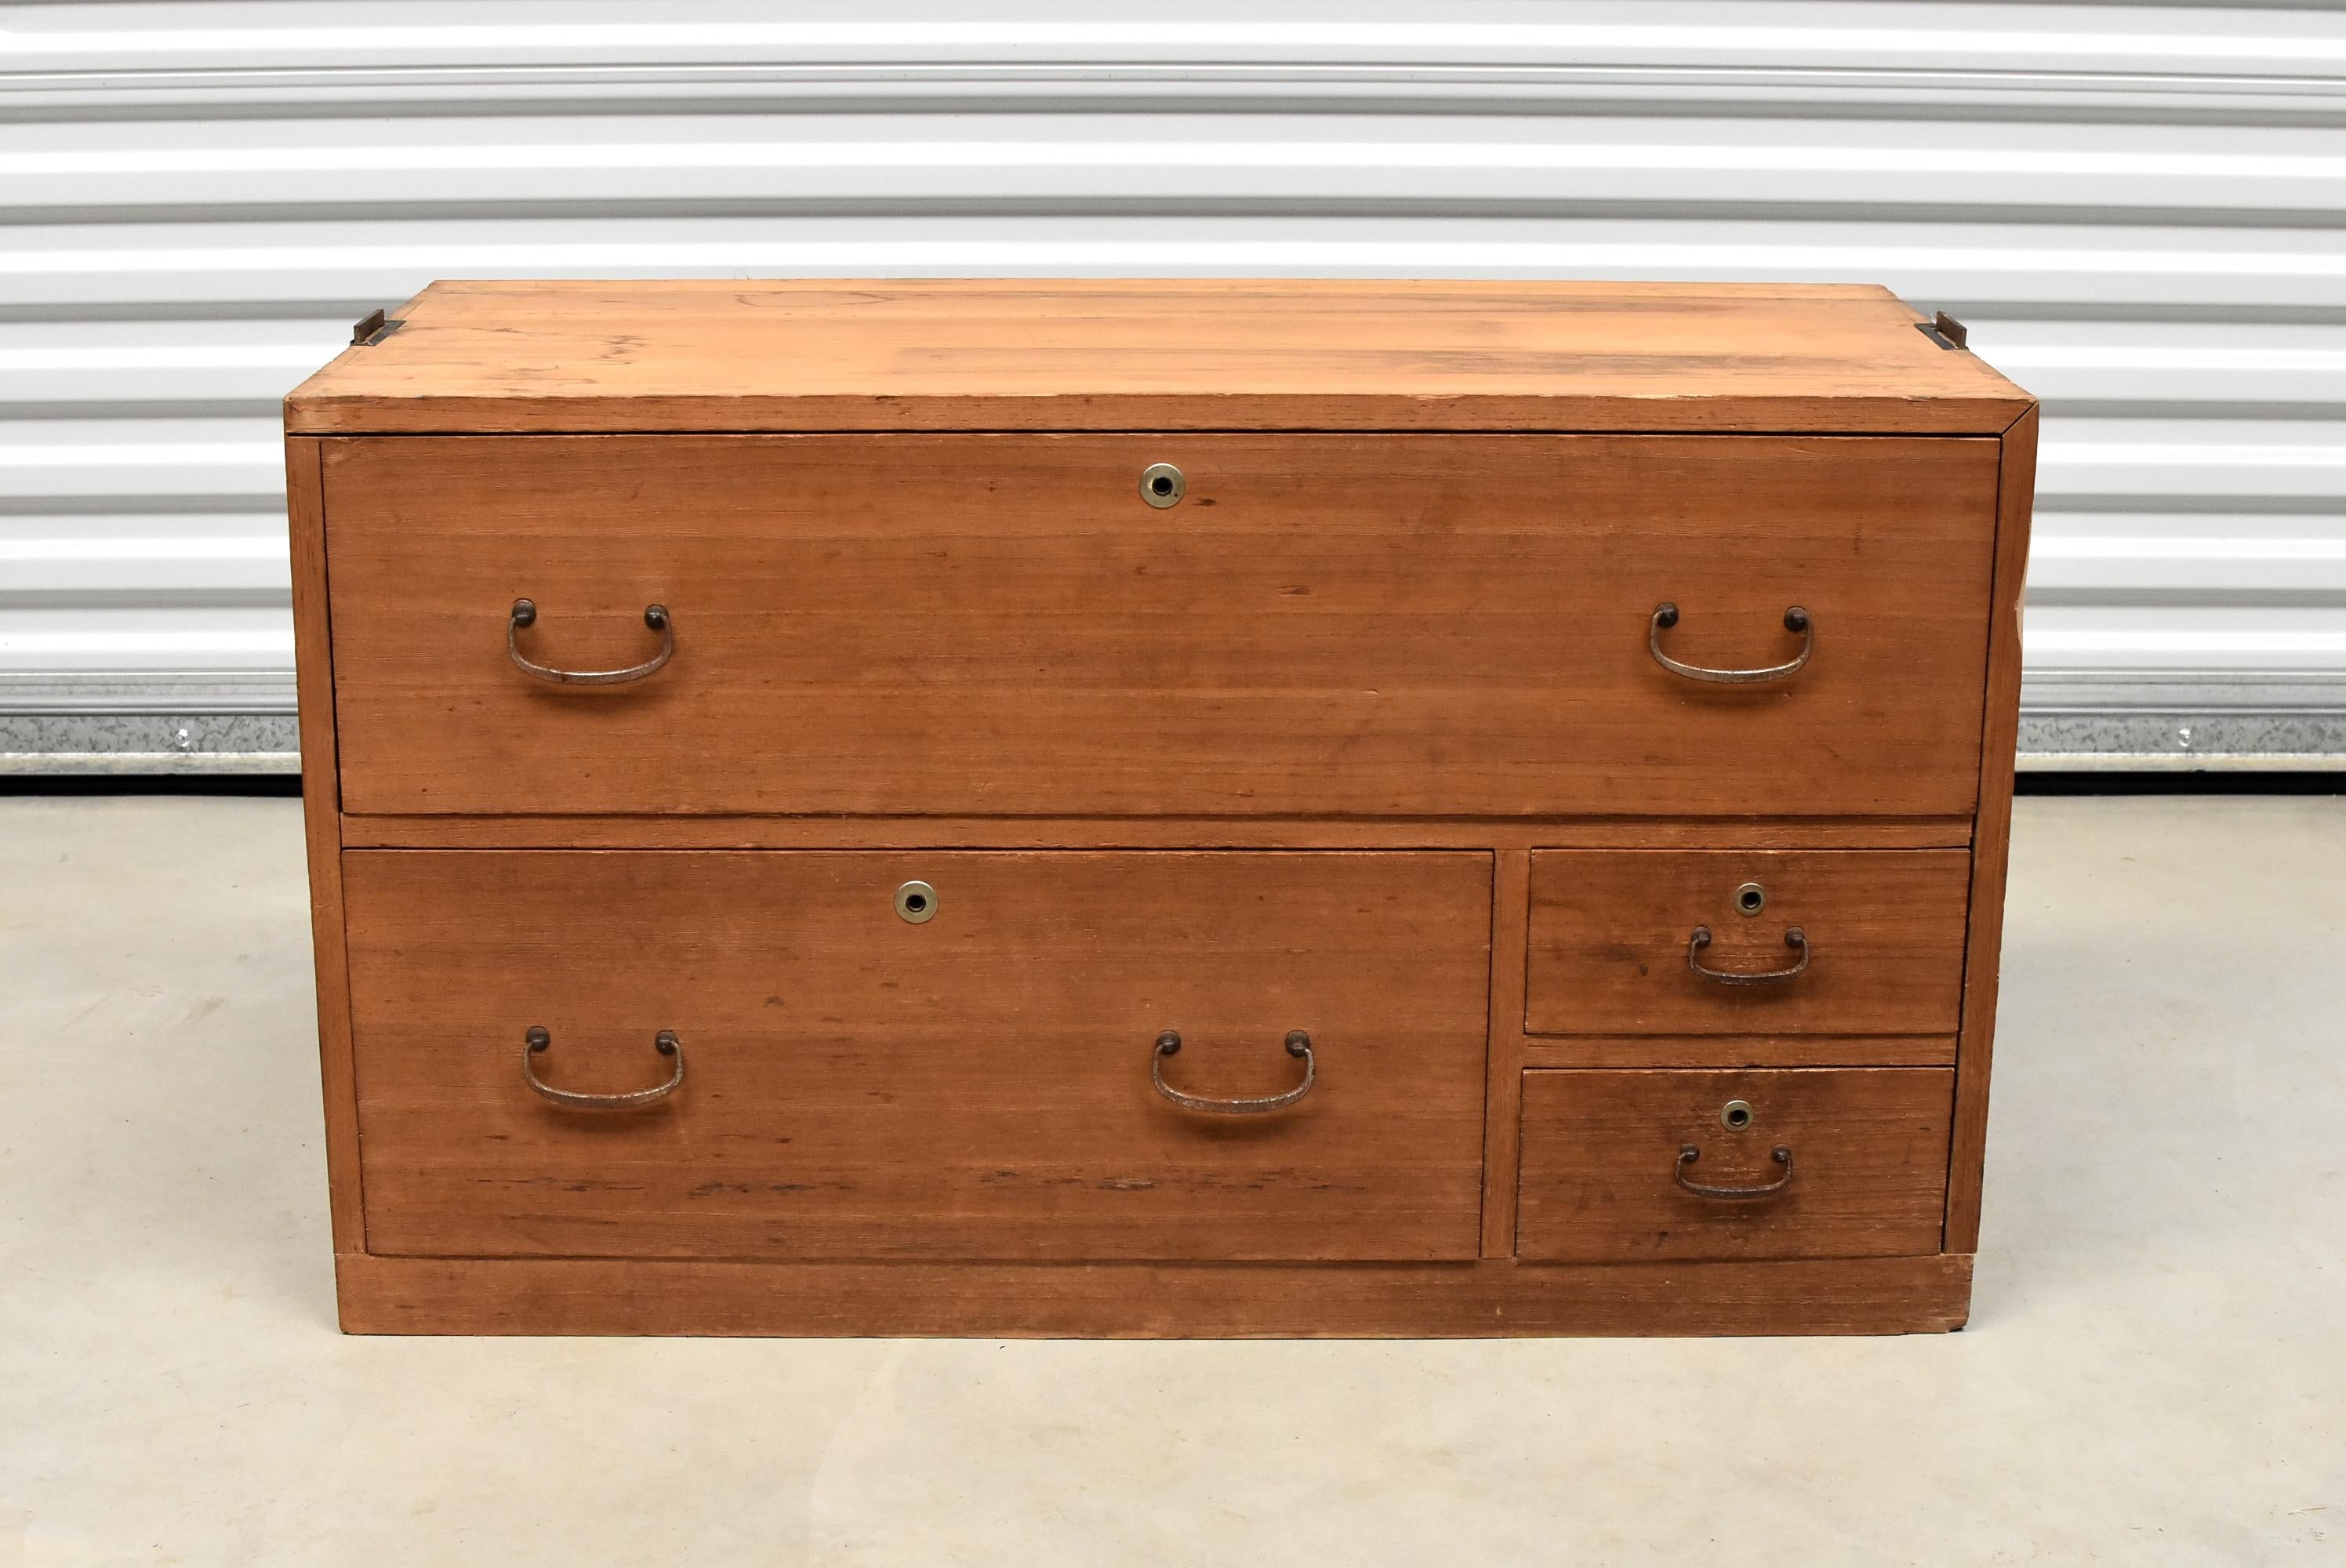 An elegant vintage Japanese Tansu in natural finish. Beautiful solid wood. Simple, elegant, solid brass hardware. Four drawers in great condition. Natural finish makes the piece versatile in any interior. Retractable solid iron side handles make